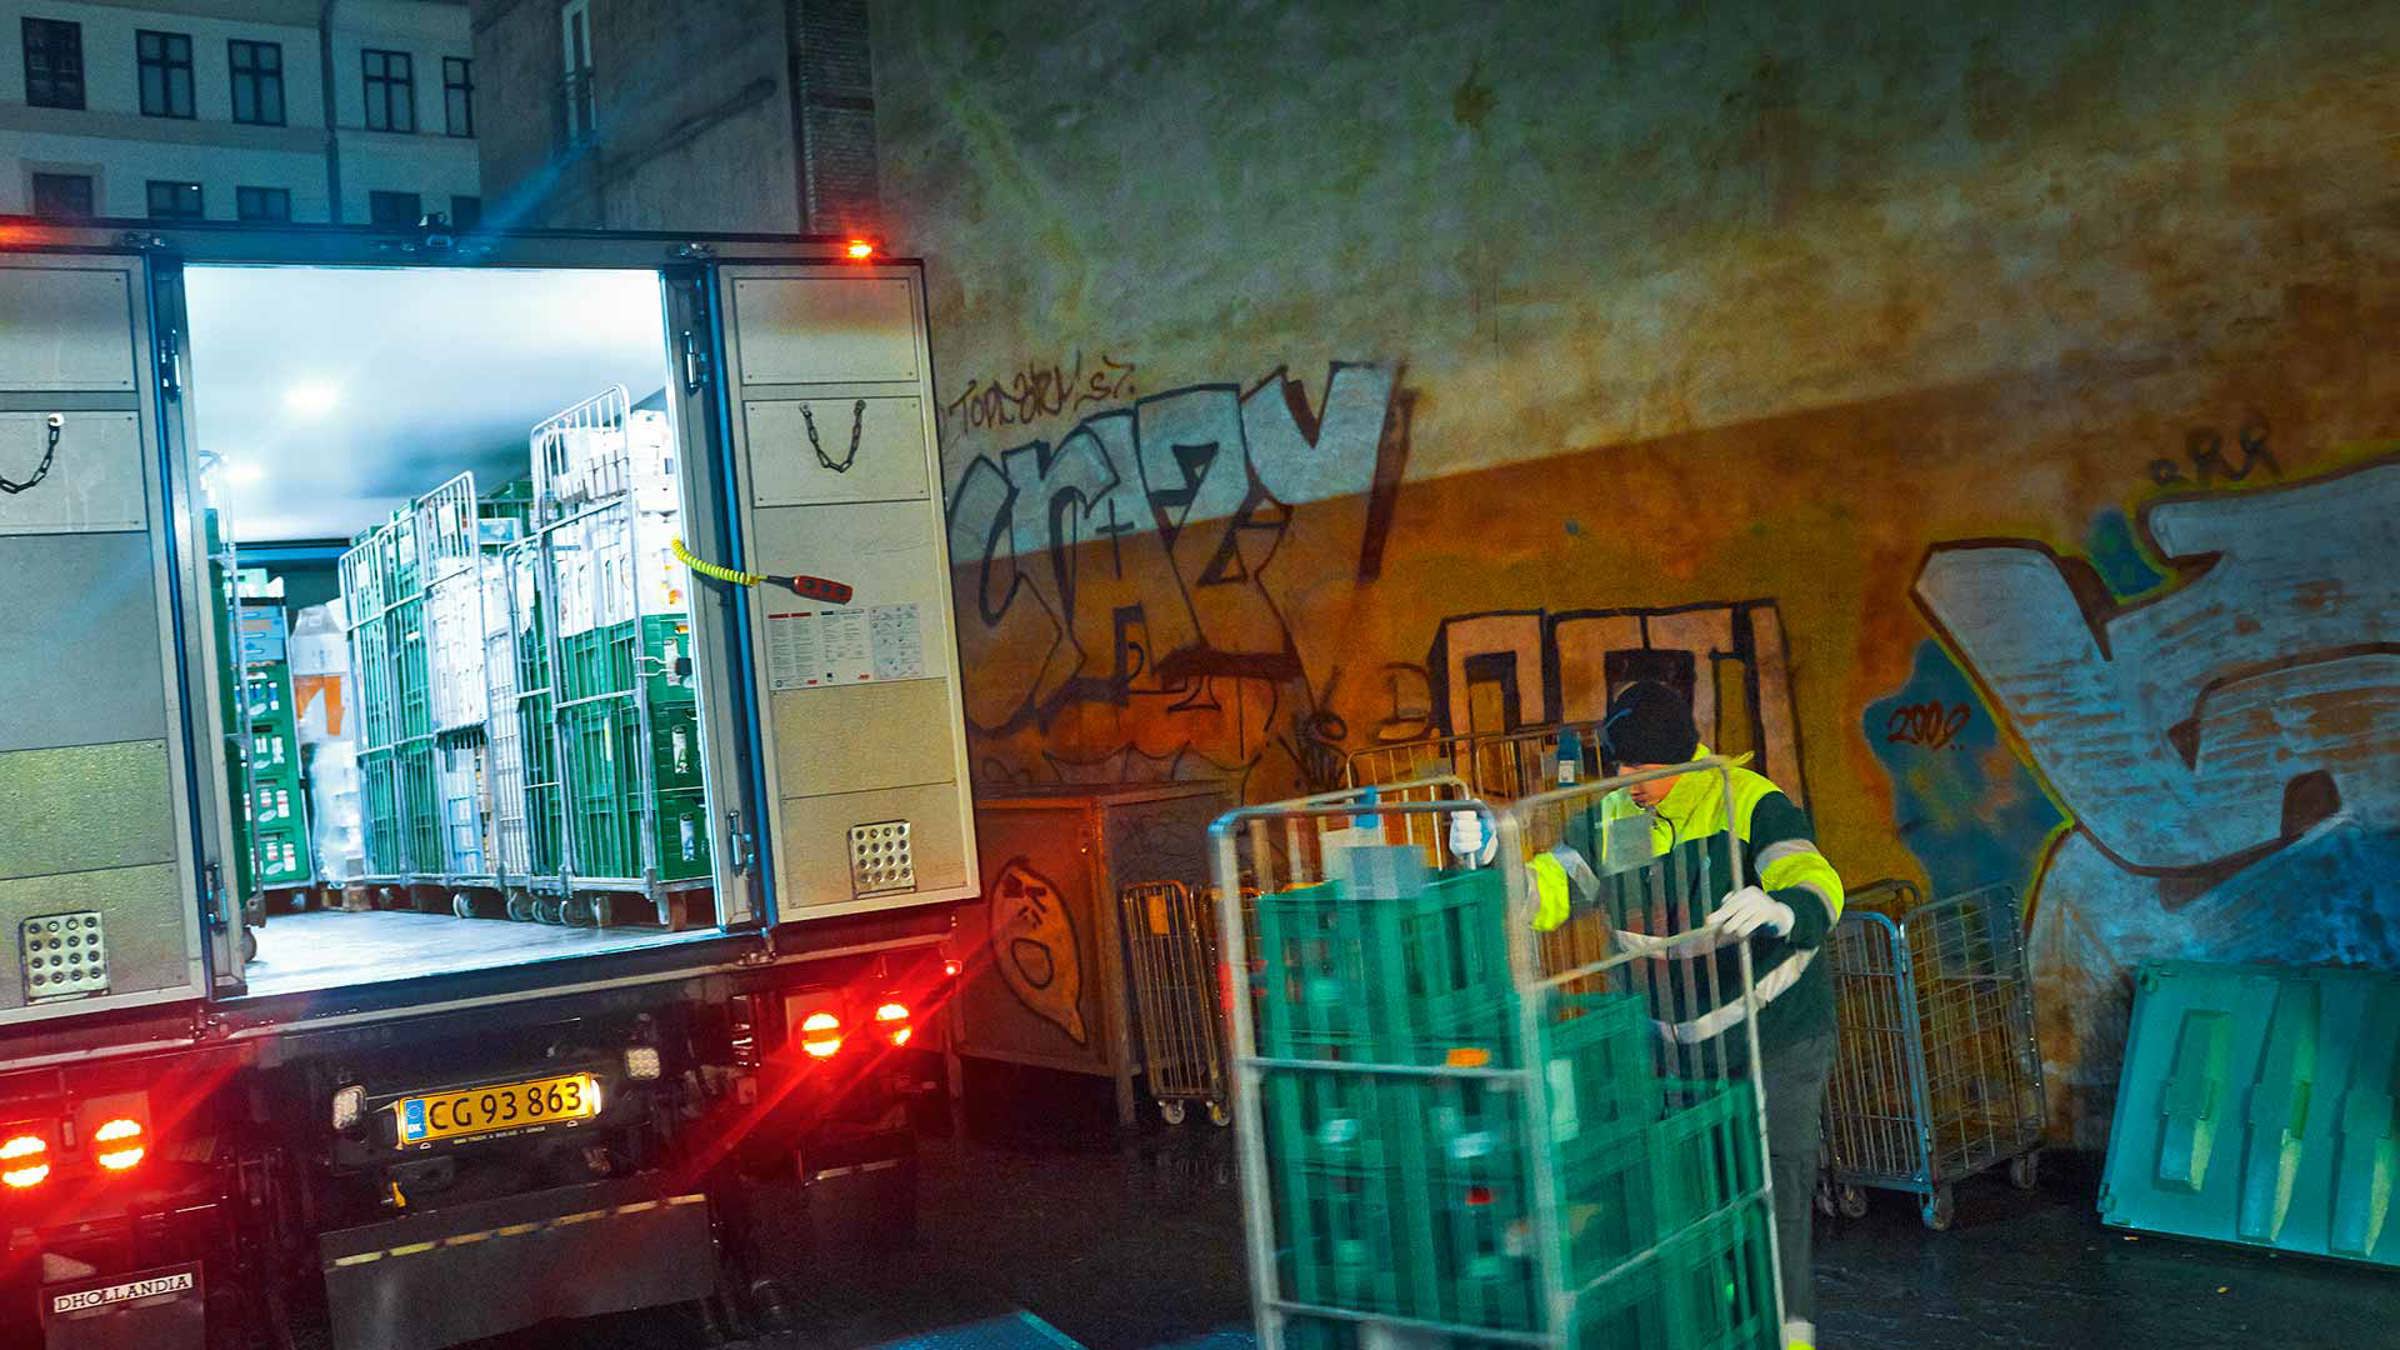 A worker loading trolleys into a truck at night